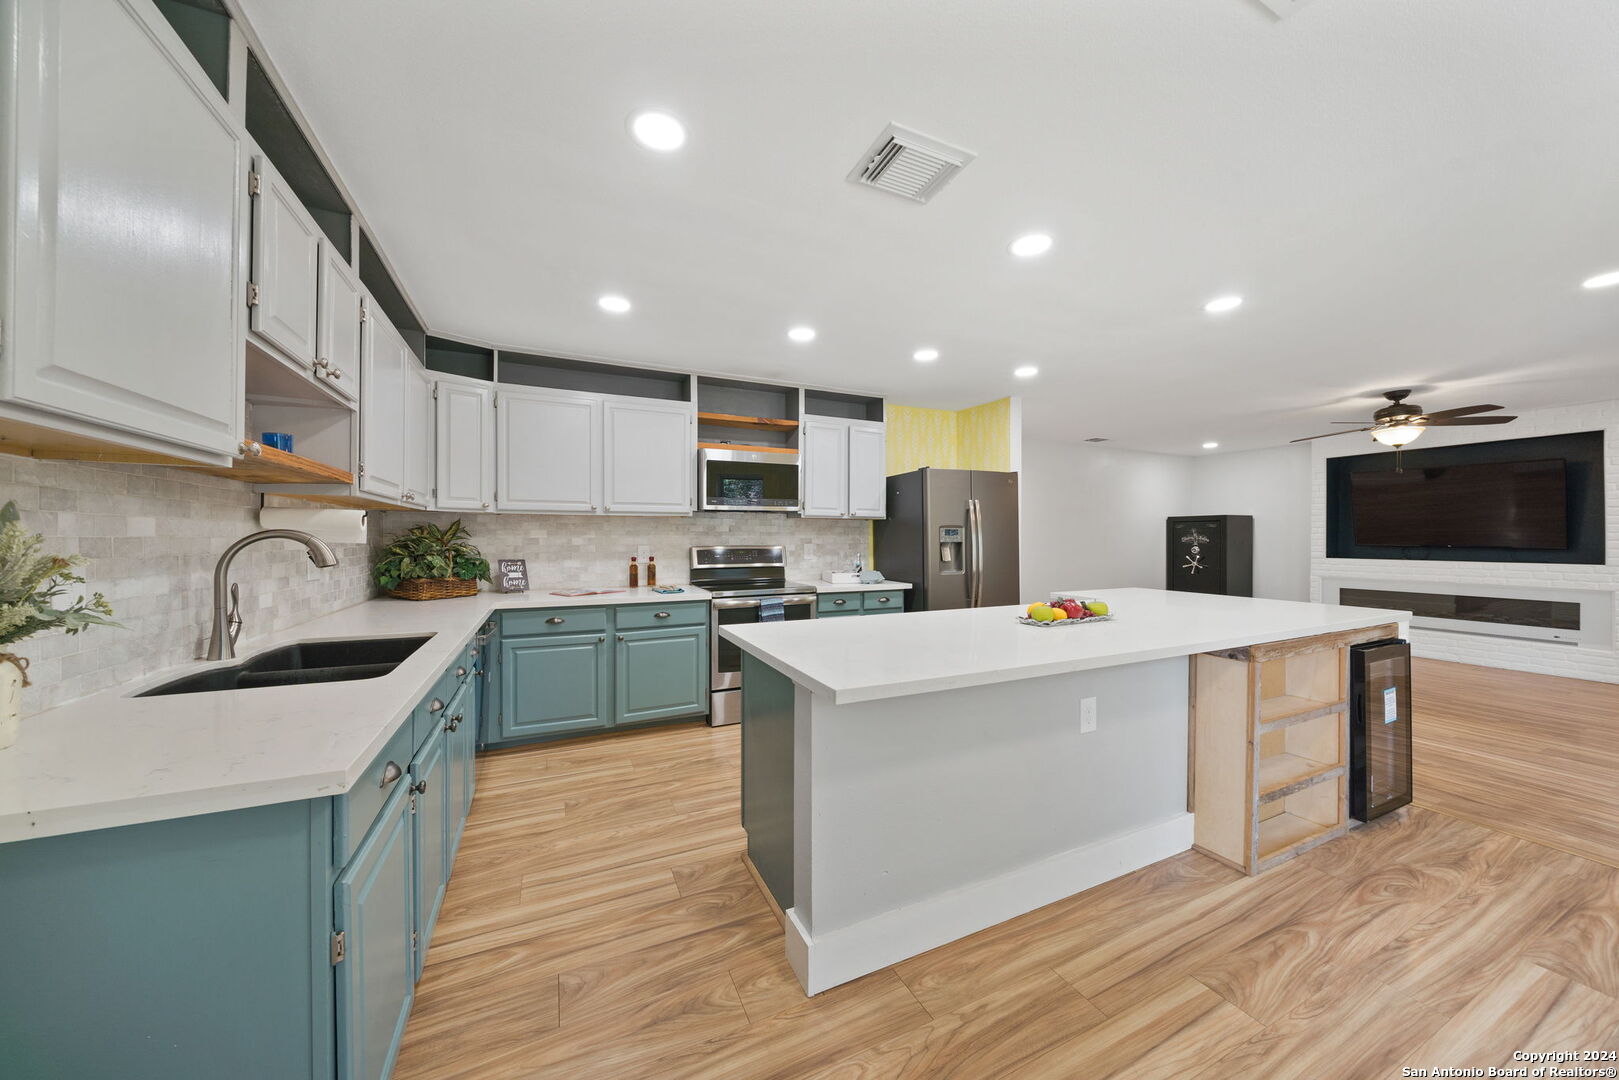 a kitchen with kitchen island stainless steel appliances a sink a stove a microwave a center island and some cabinets